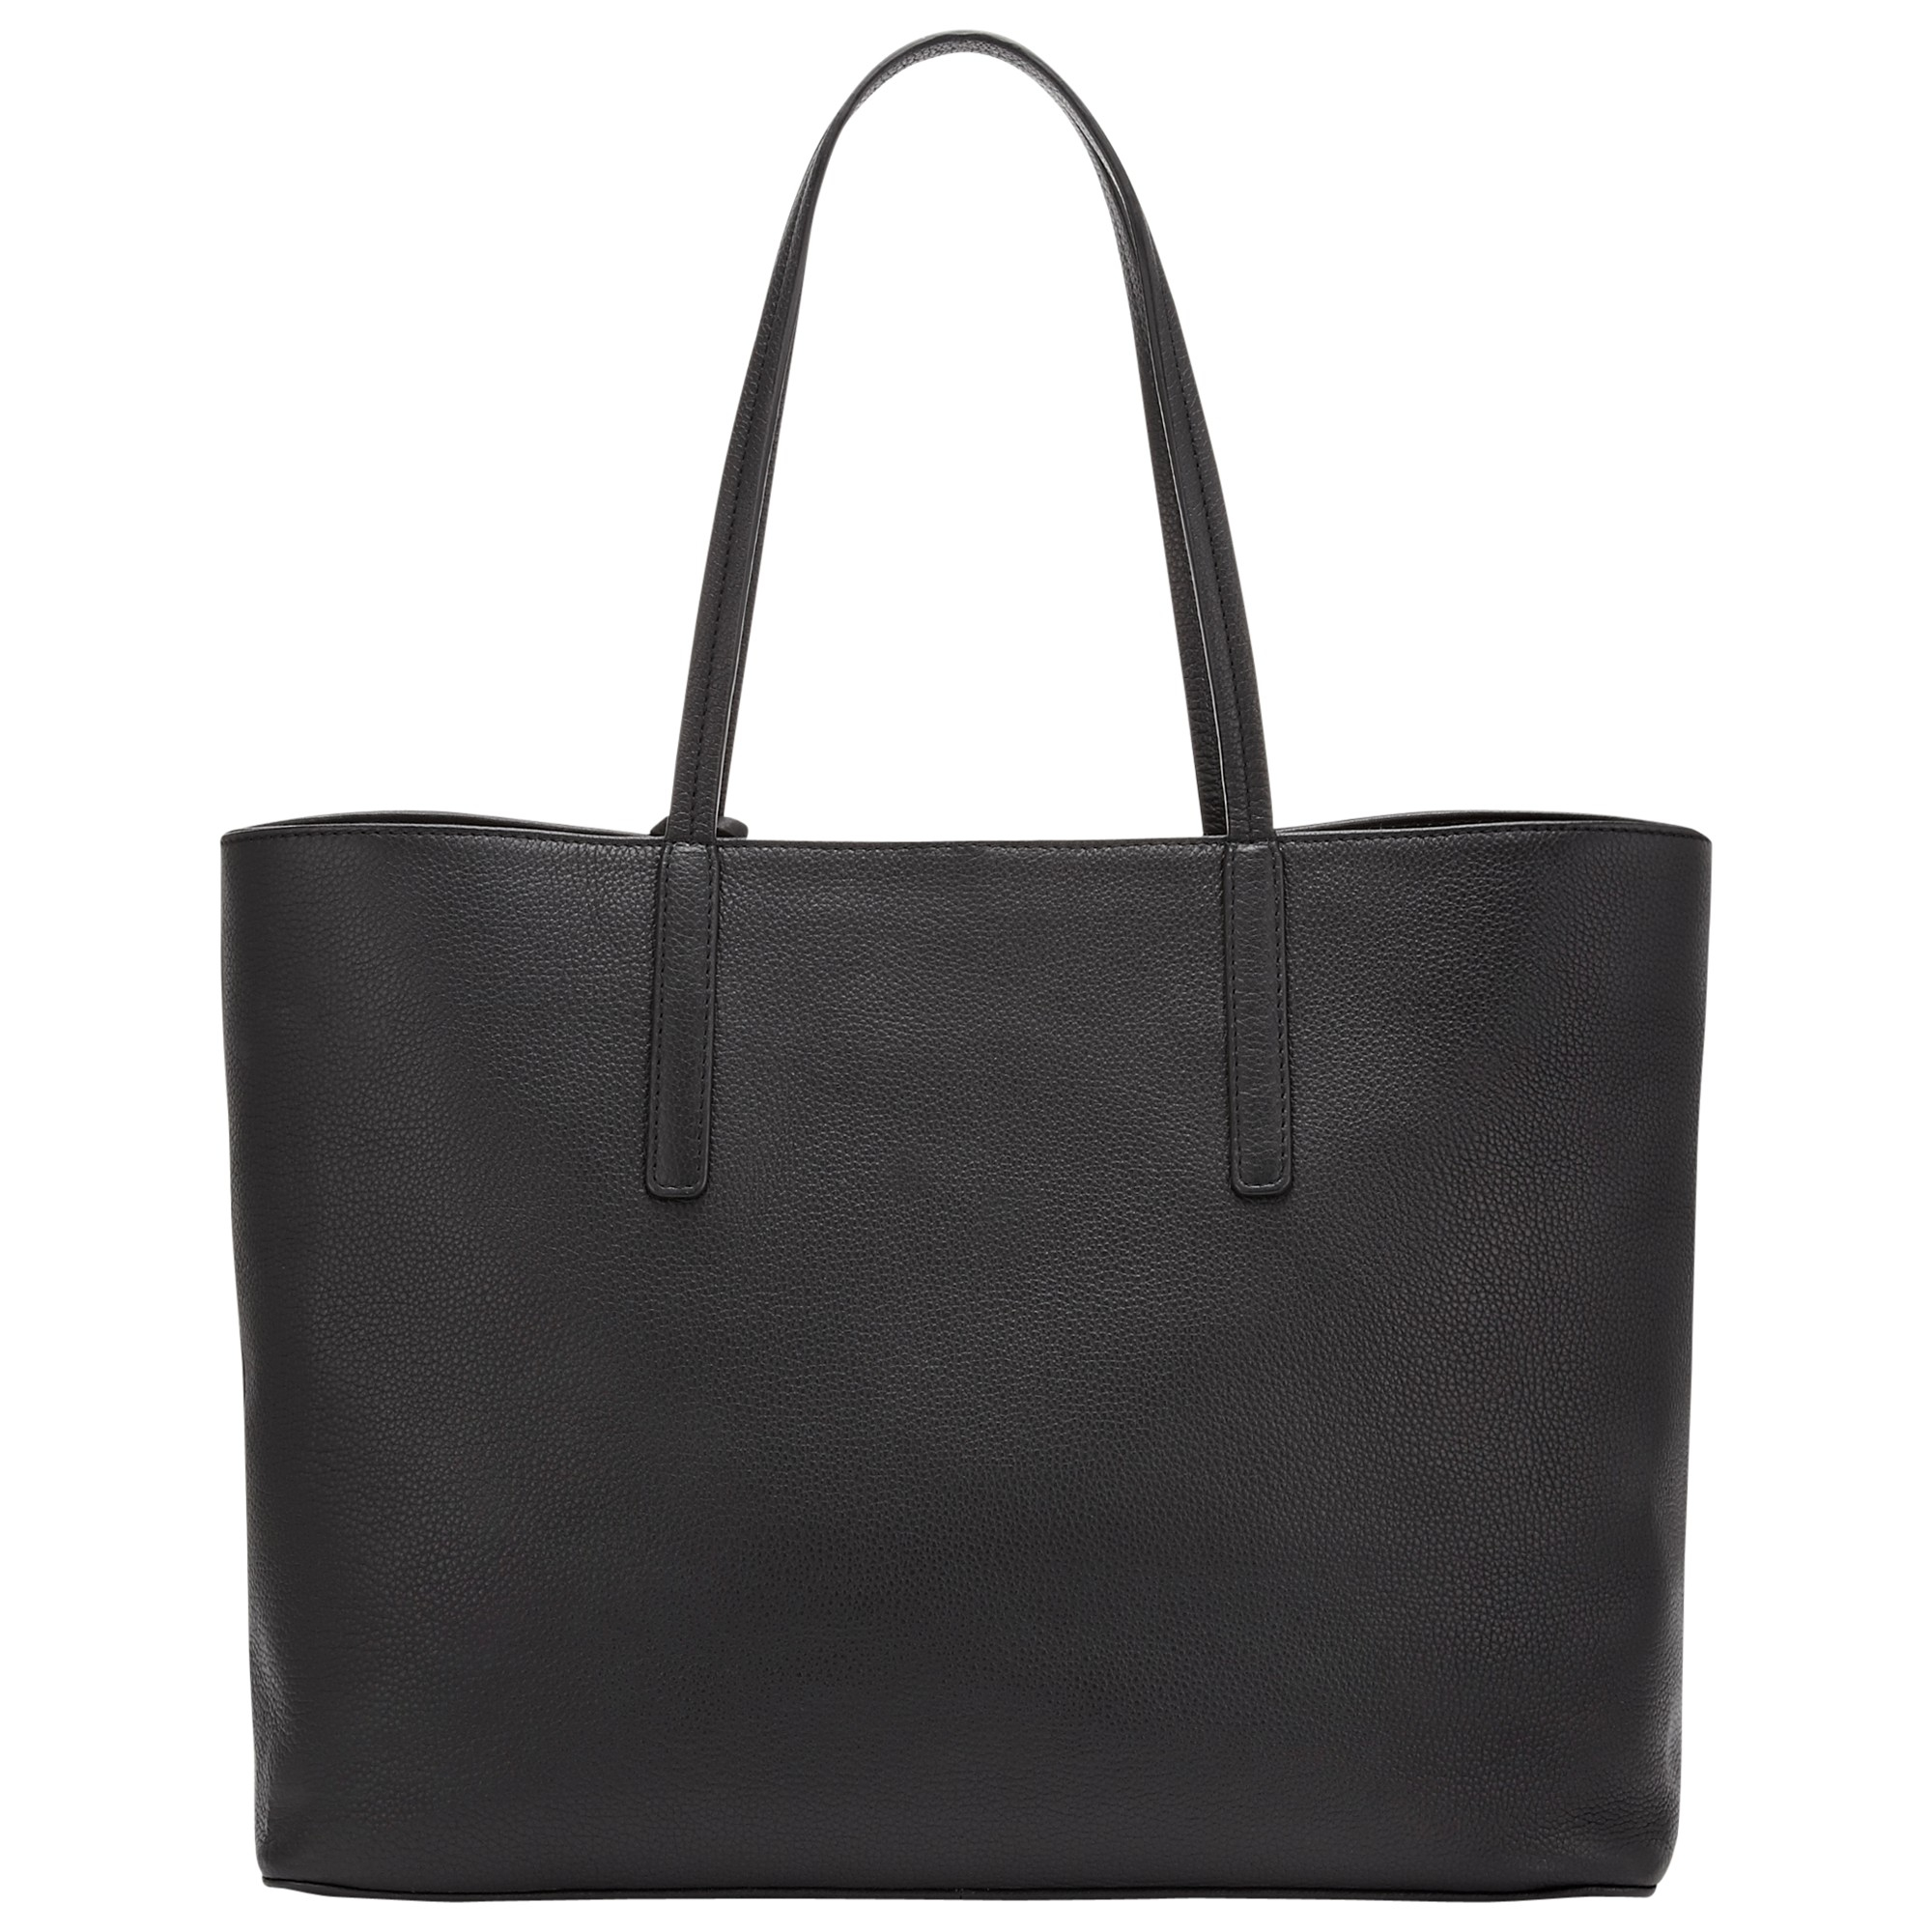 Whistles Fleet Large Leather Tote Bag in Black | Lyst